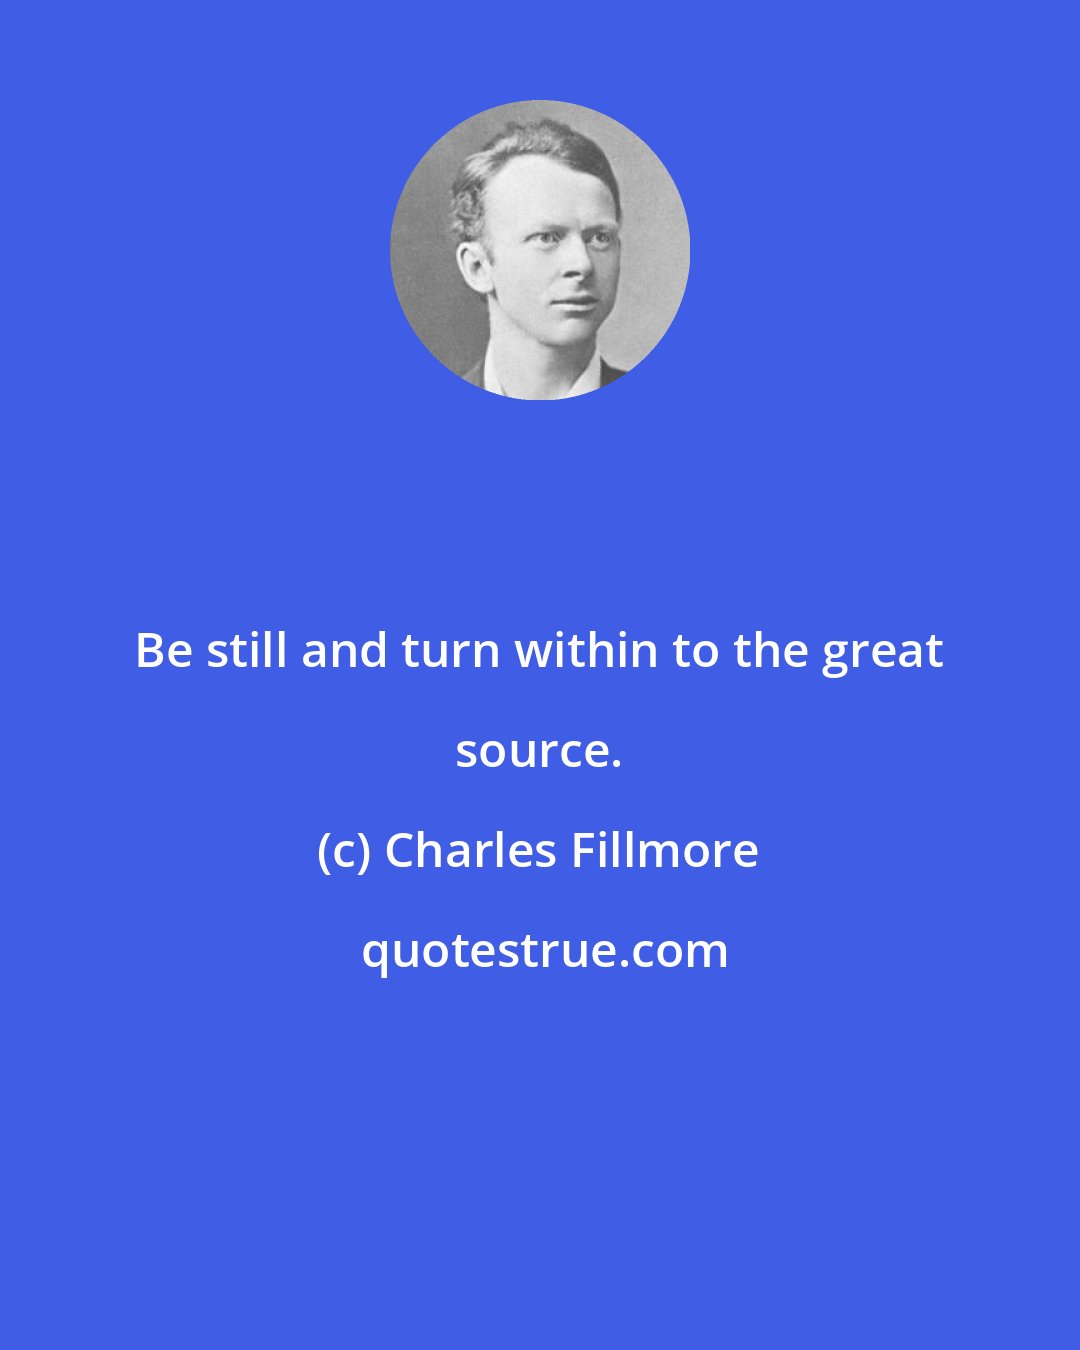 Charles Fillmore: Be still and turn within to the great source.